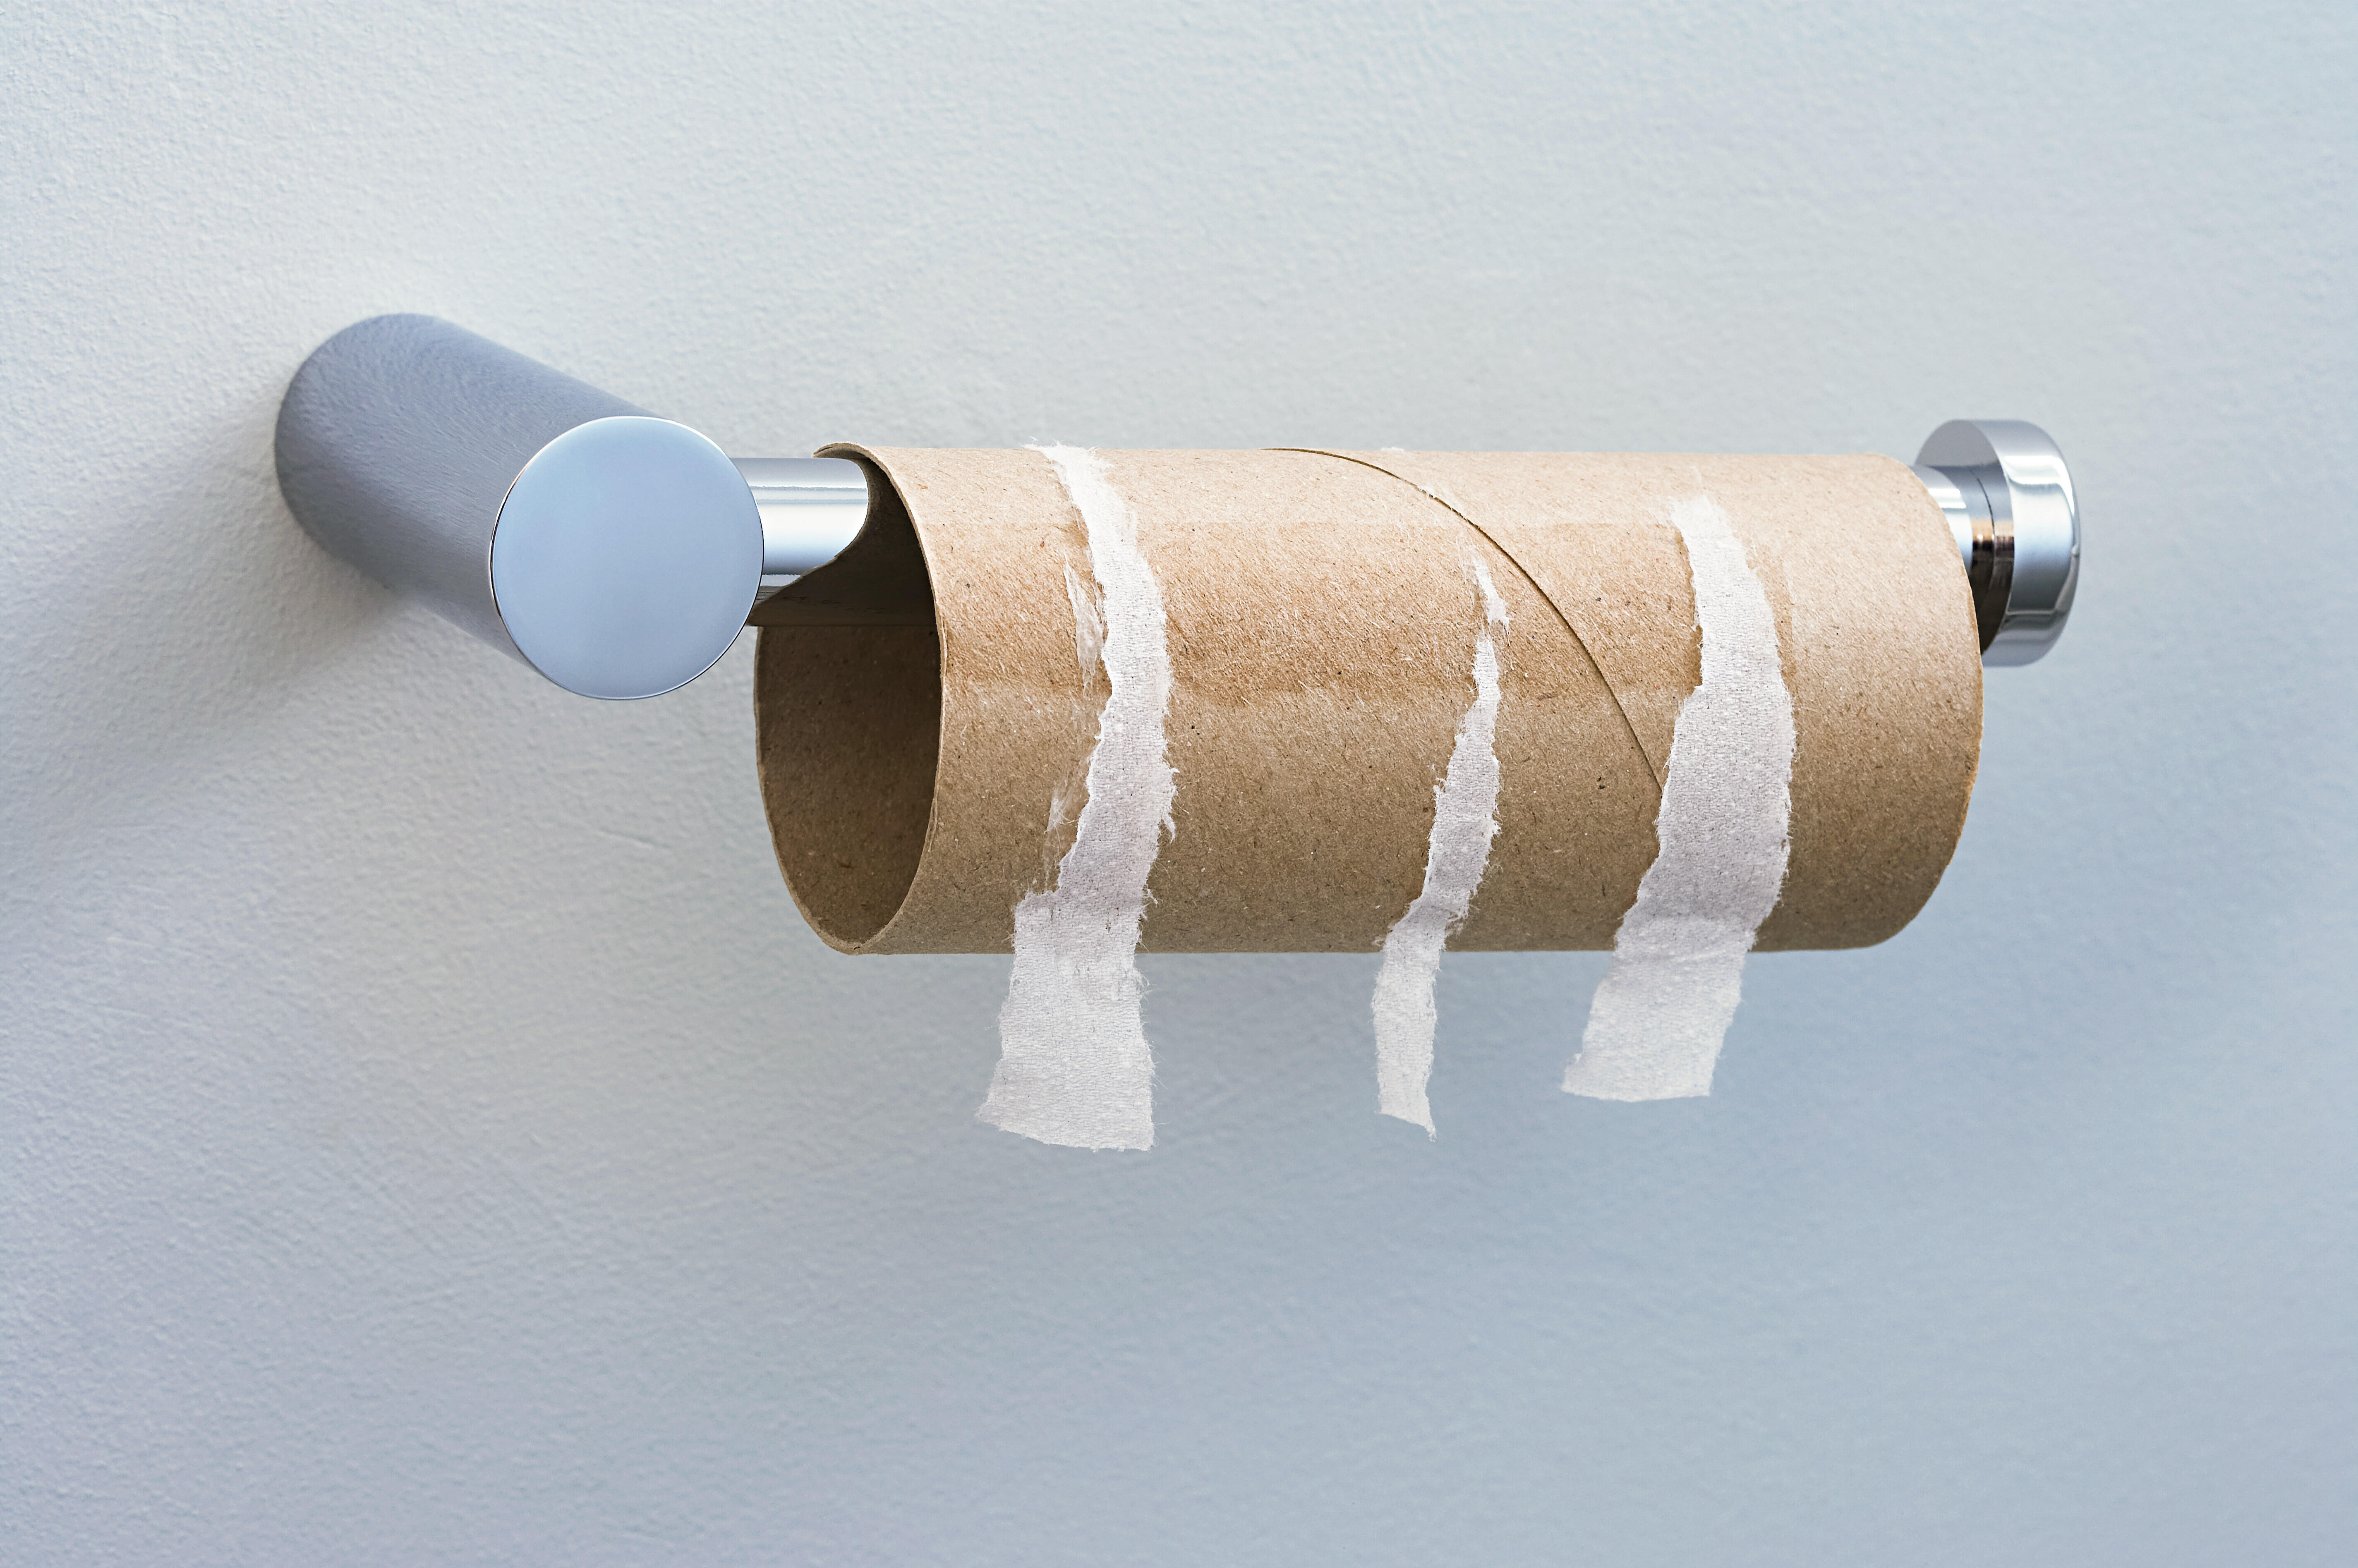 Inflation Targets Your Toilet Paper Rolls as Less May Not Be More iHeart.